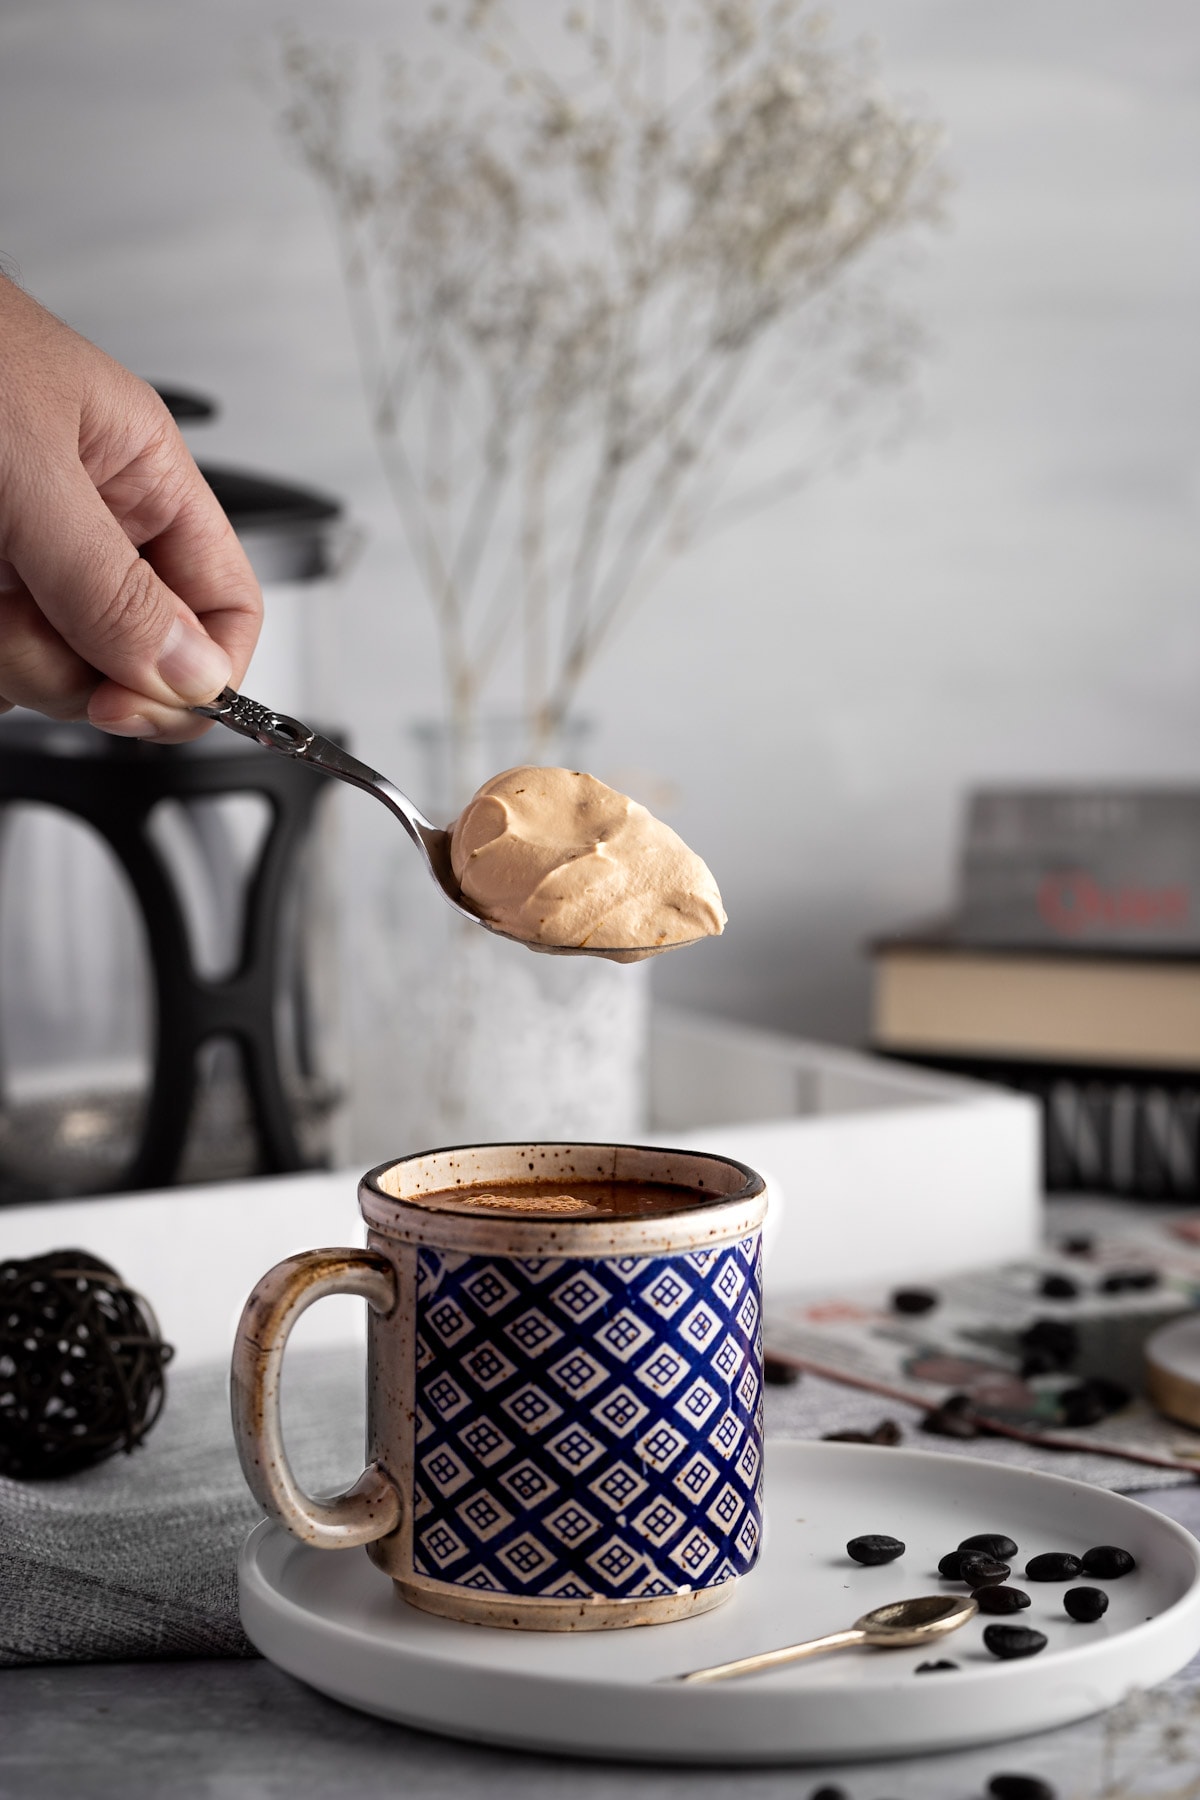 A scoop of coffee whipped cream being held on a metal spoon above a mug of hot chocolate, with a french press, glass vase and books in the background.